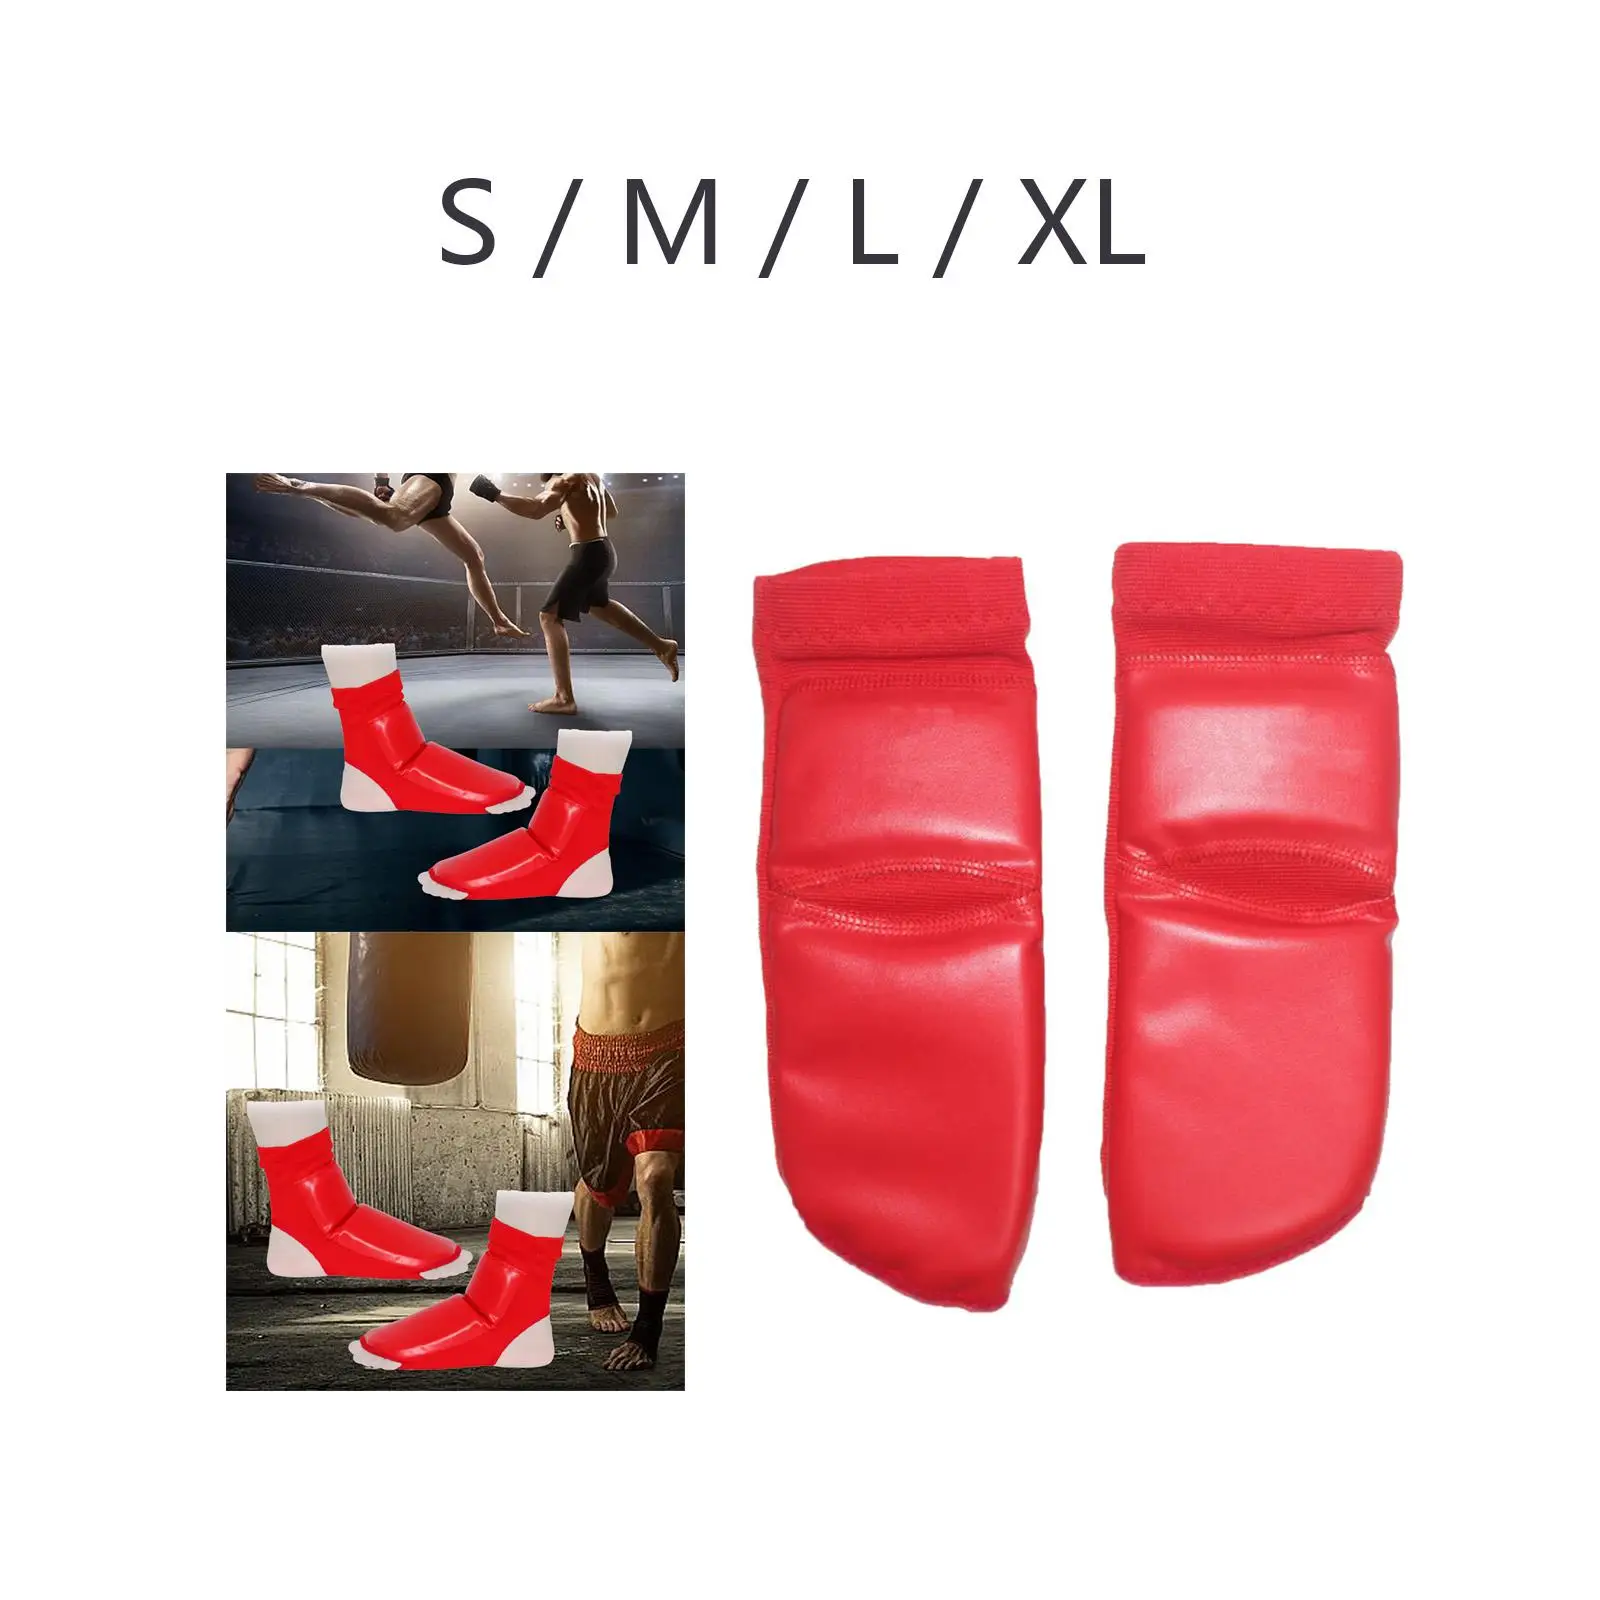 Instep Guard Protective Protector for Kids Adults Boxing Taekwondo